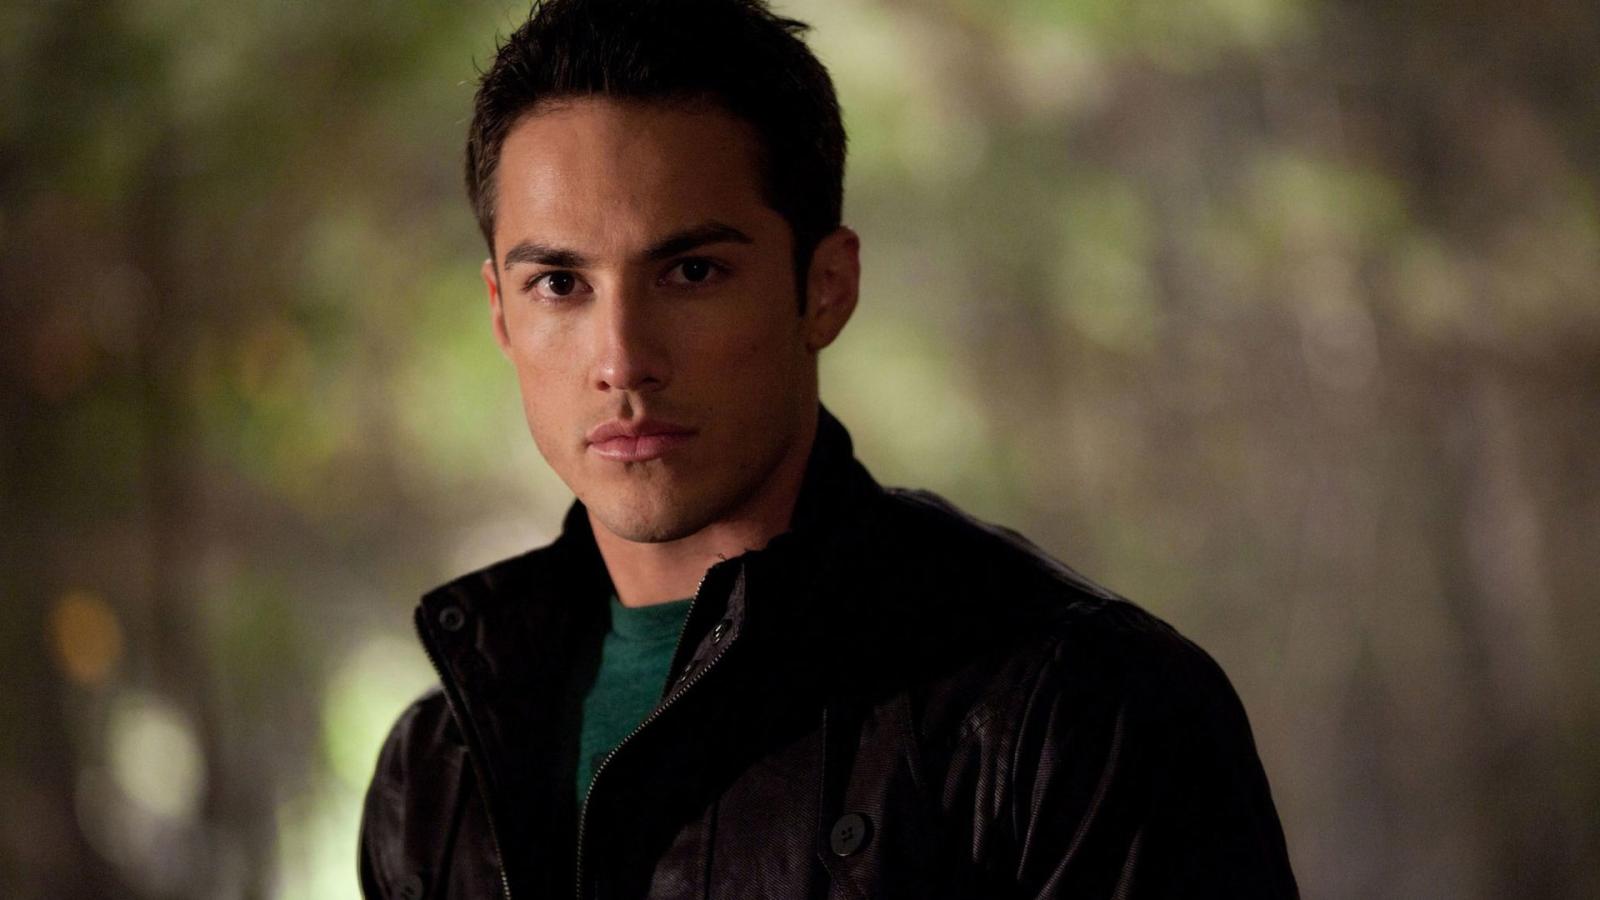 Vampire Diaries Characters vs Cast Real Age Raises Some Eyebrows - image 8